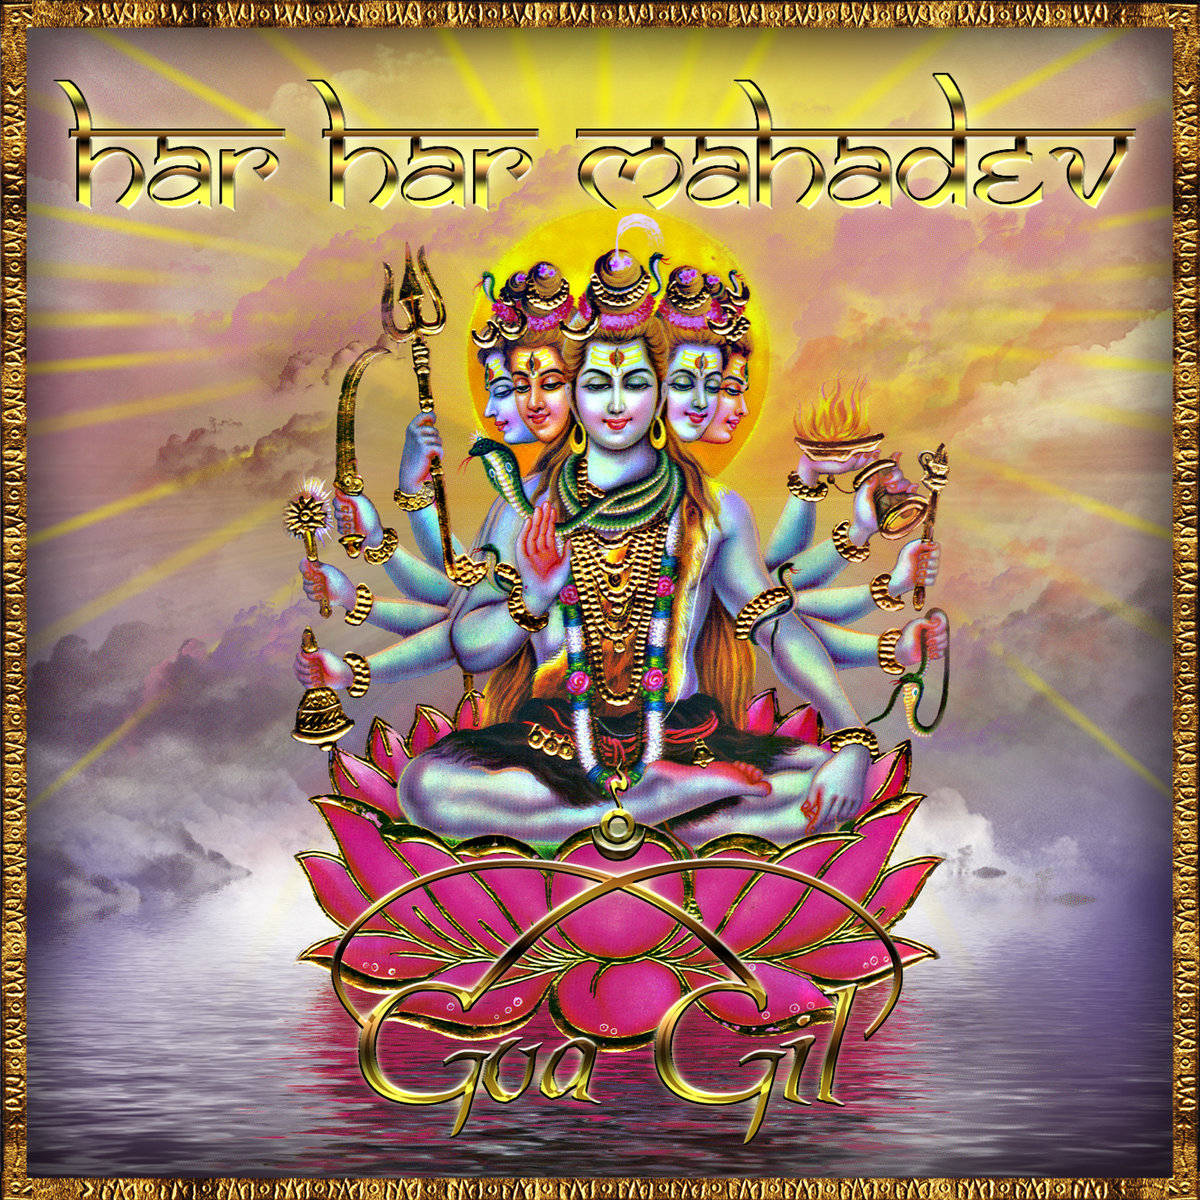 108 names of lord shiva in hindi mp3 download